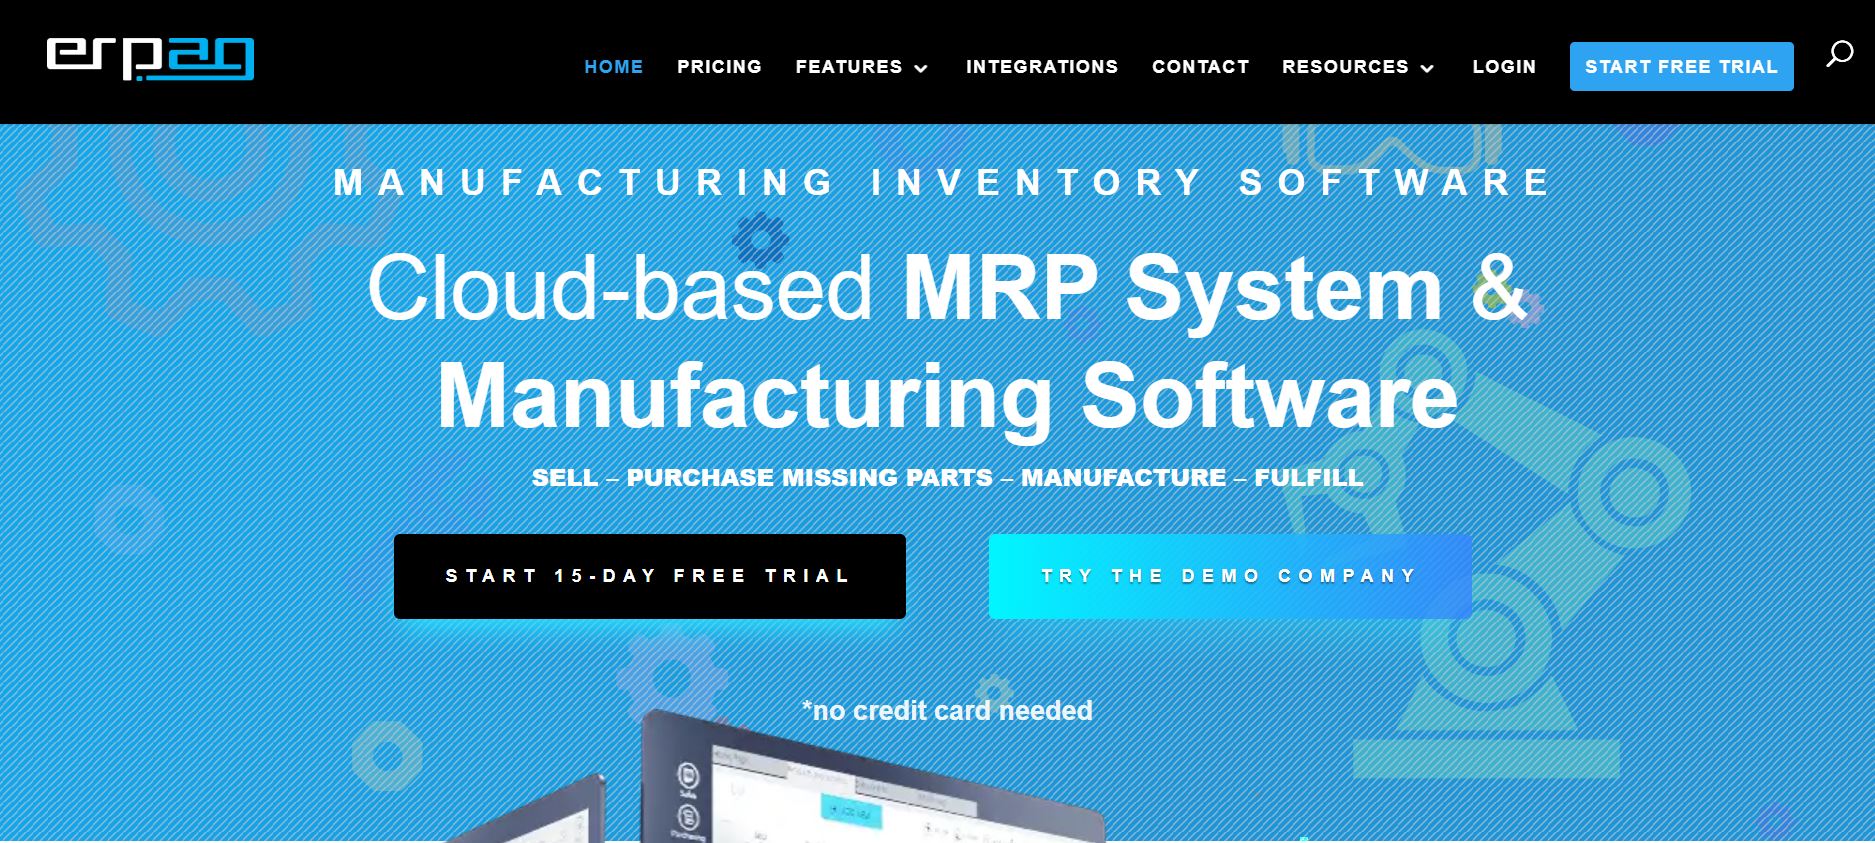 Screenshot of ERPAG manufacturing ERP software homepage.